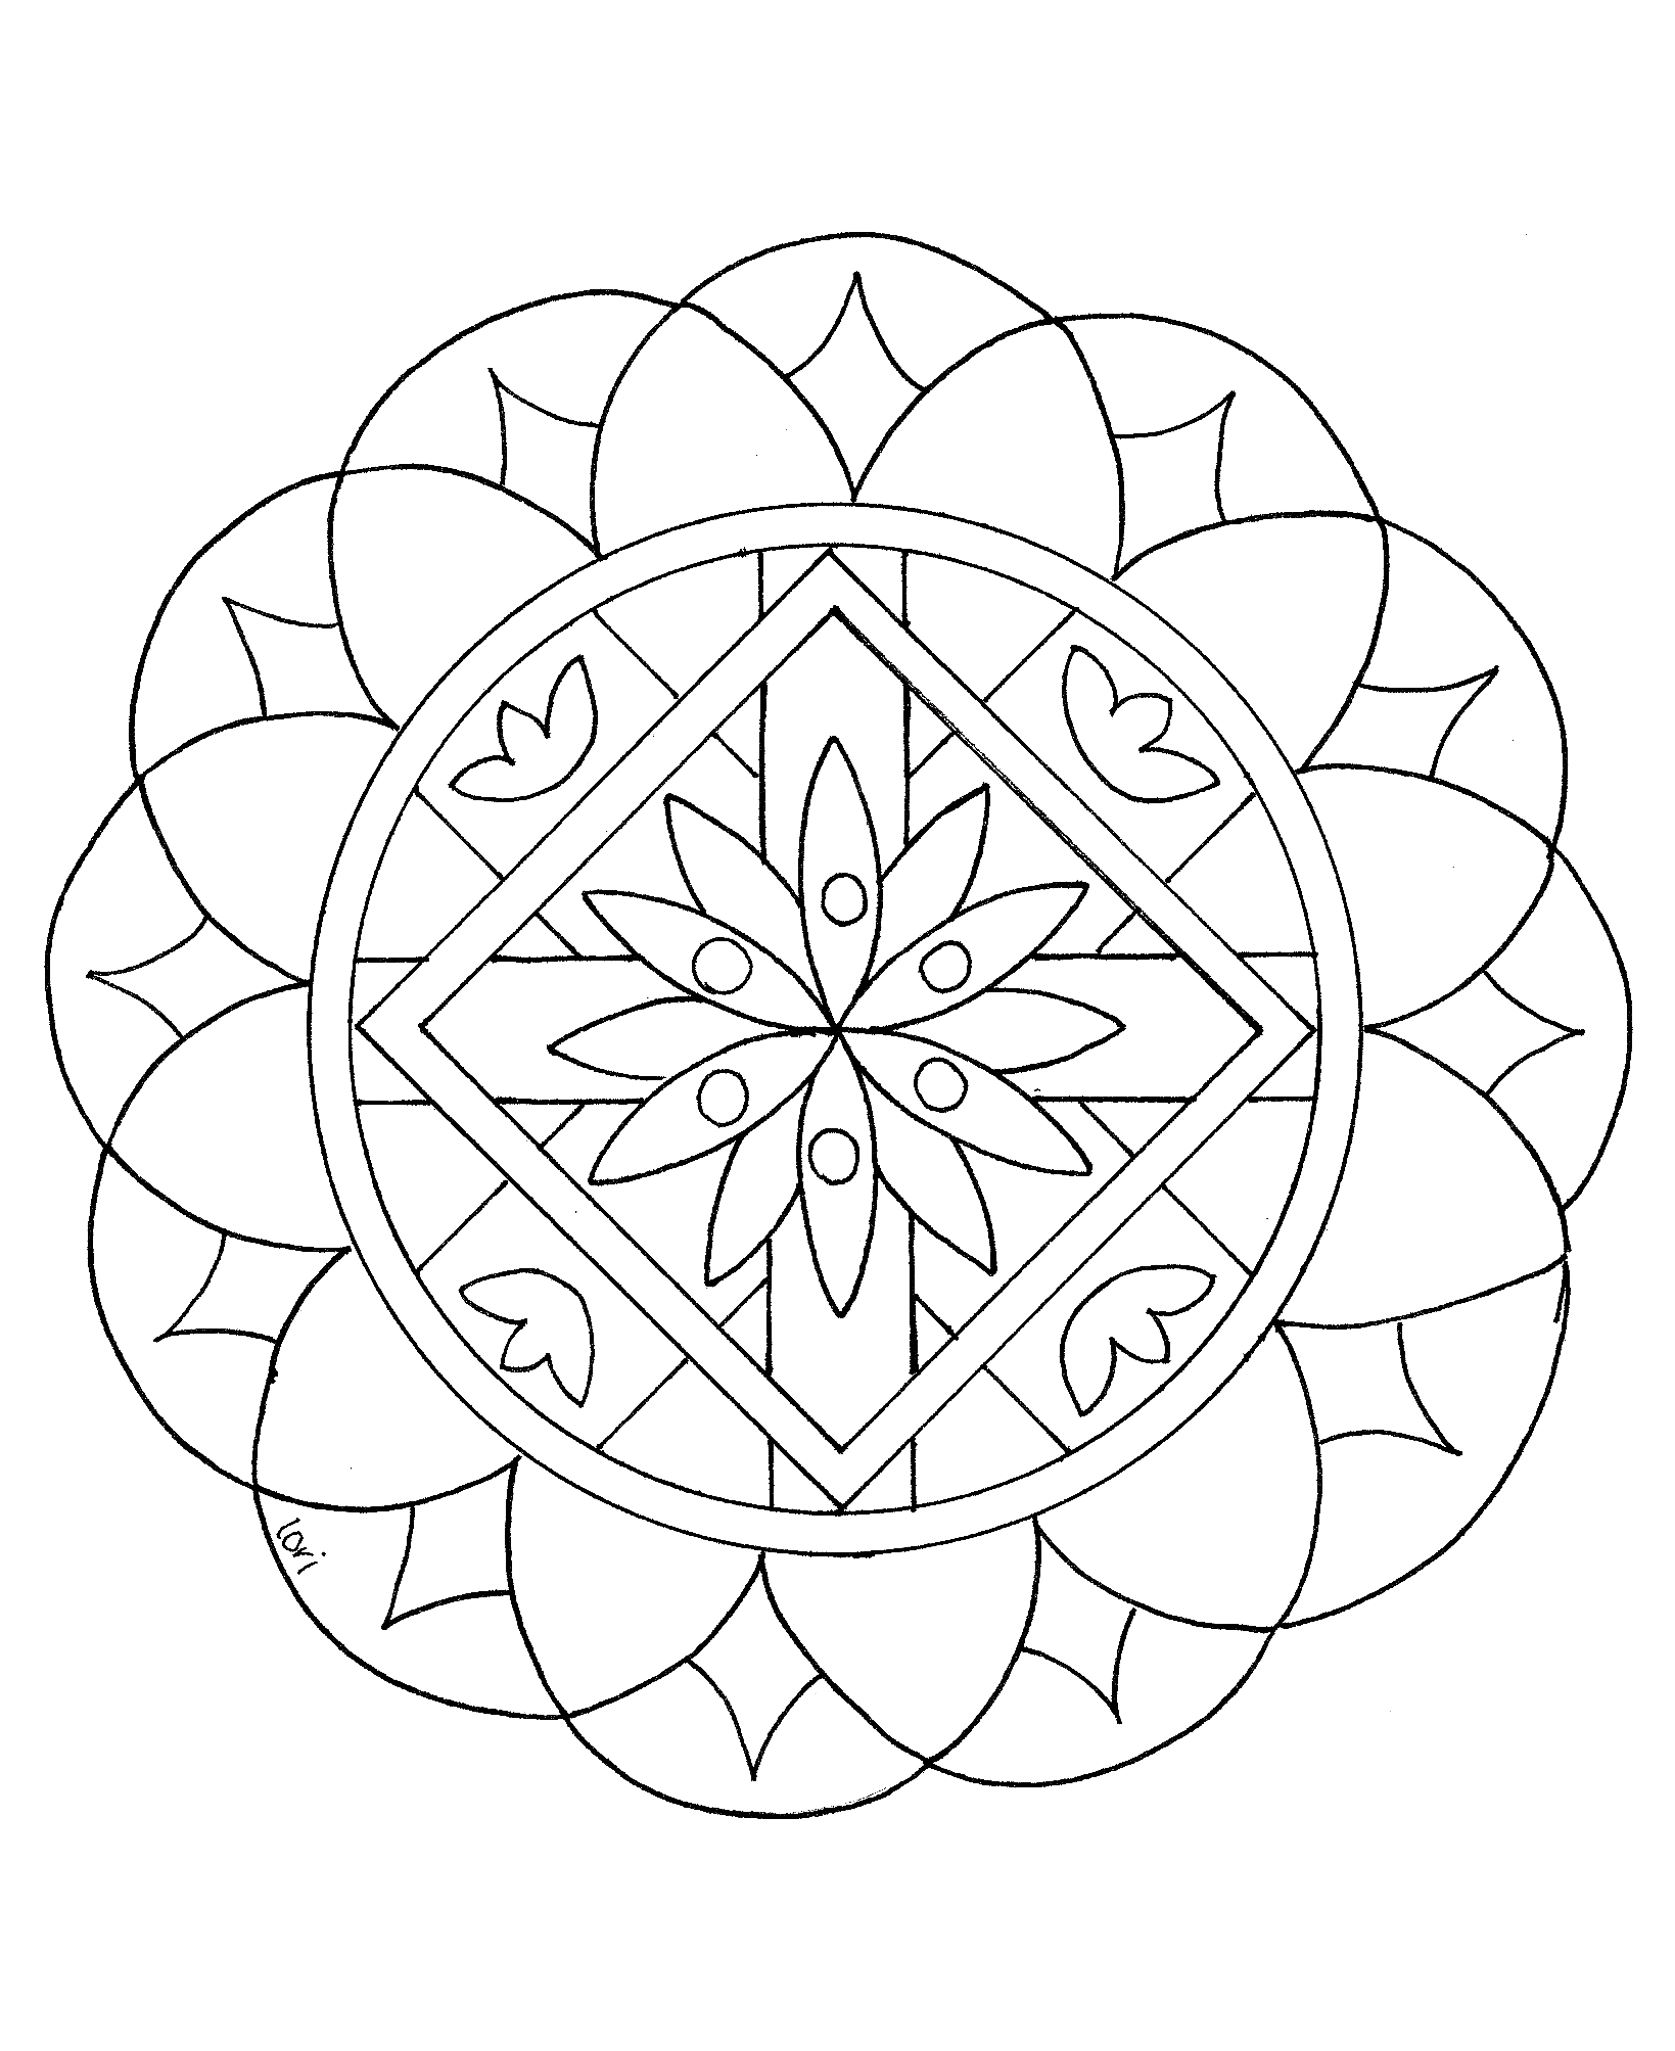 A Mandala coloring page easy to color, perfect for kids, with big areas to color. Children can color the shapes and figures anyway they like. It also gives your kids a sense of accomplishment when he finishes coloring a page.